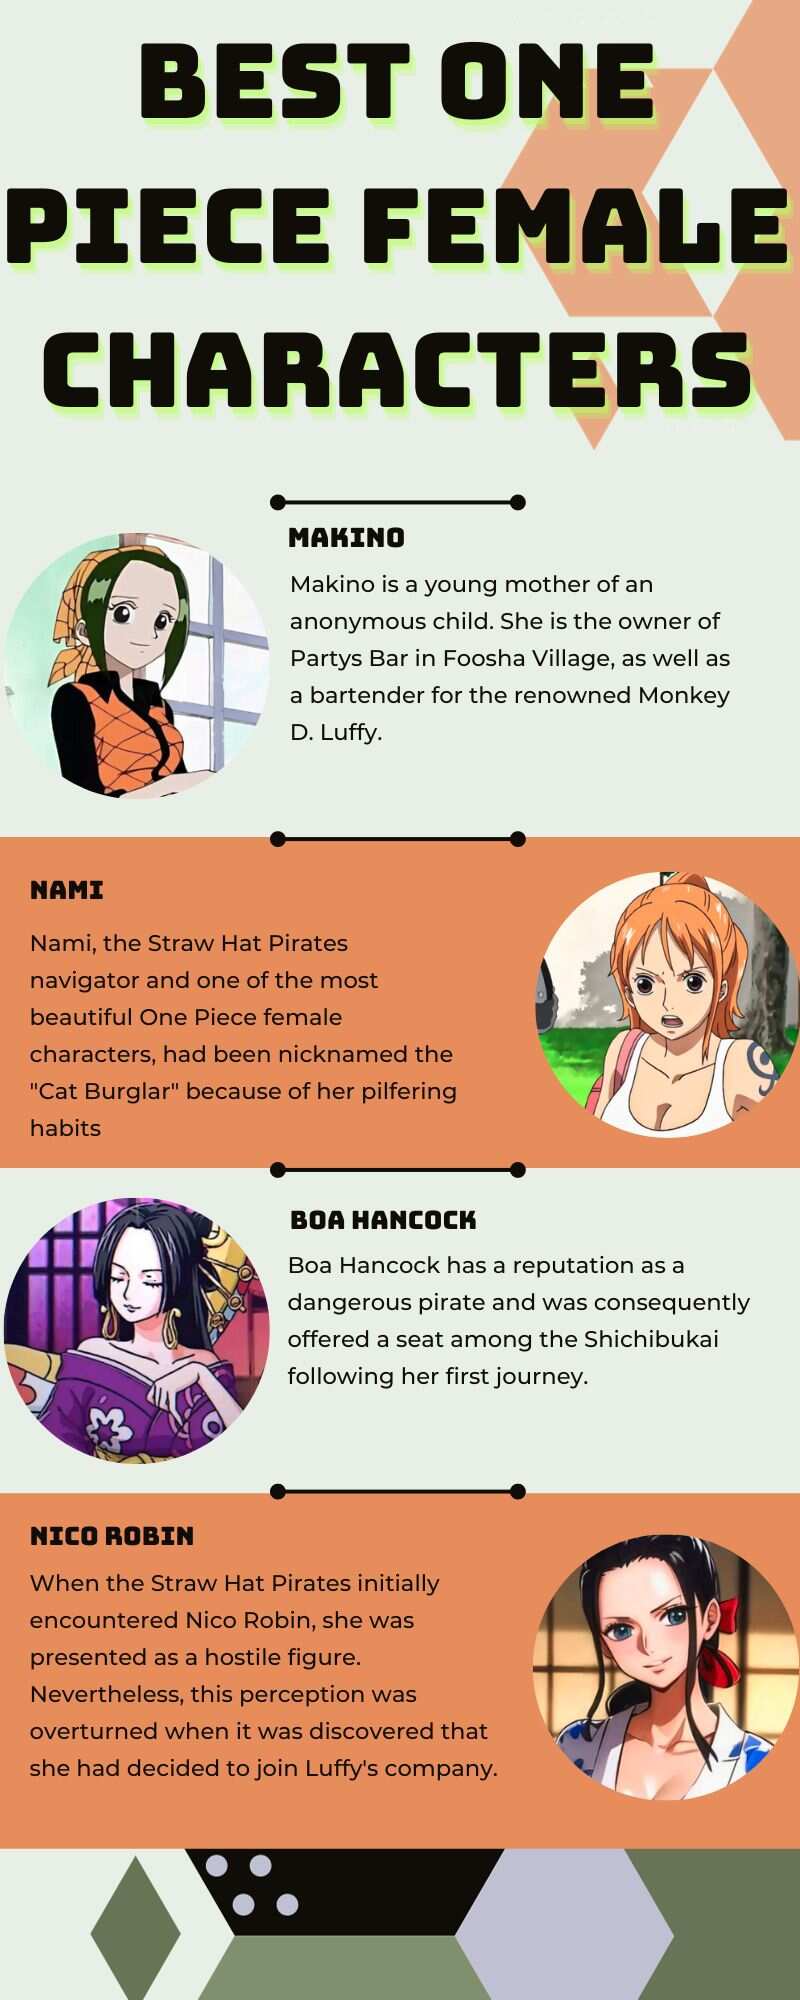 Best One Piece female characters